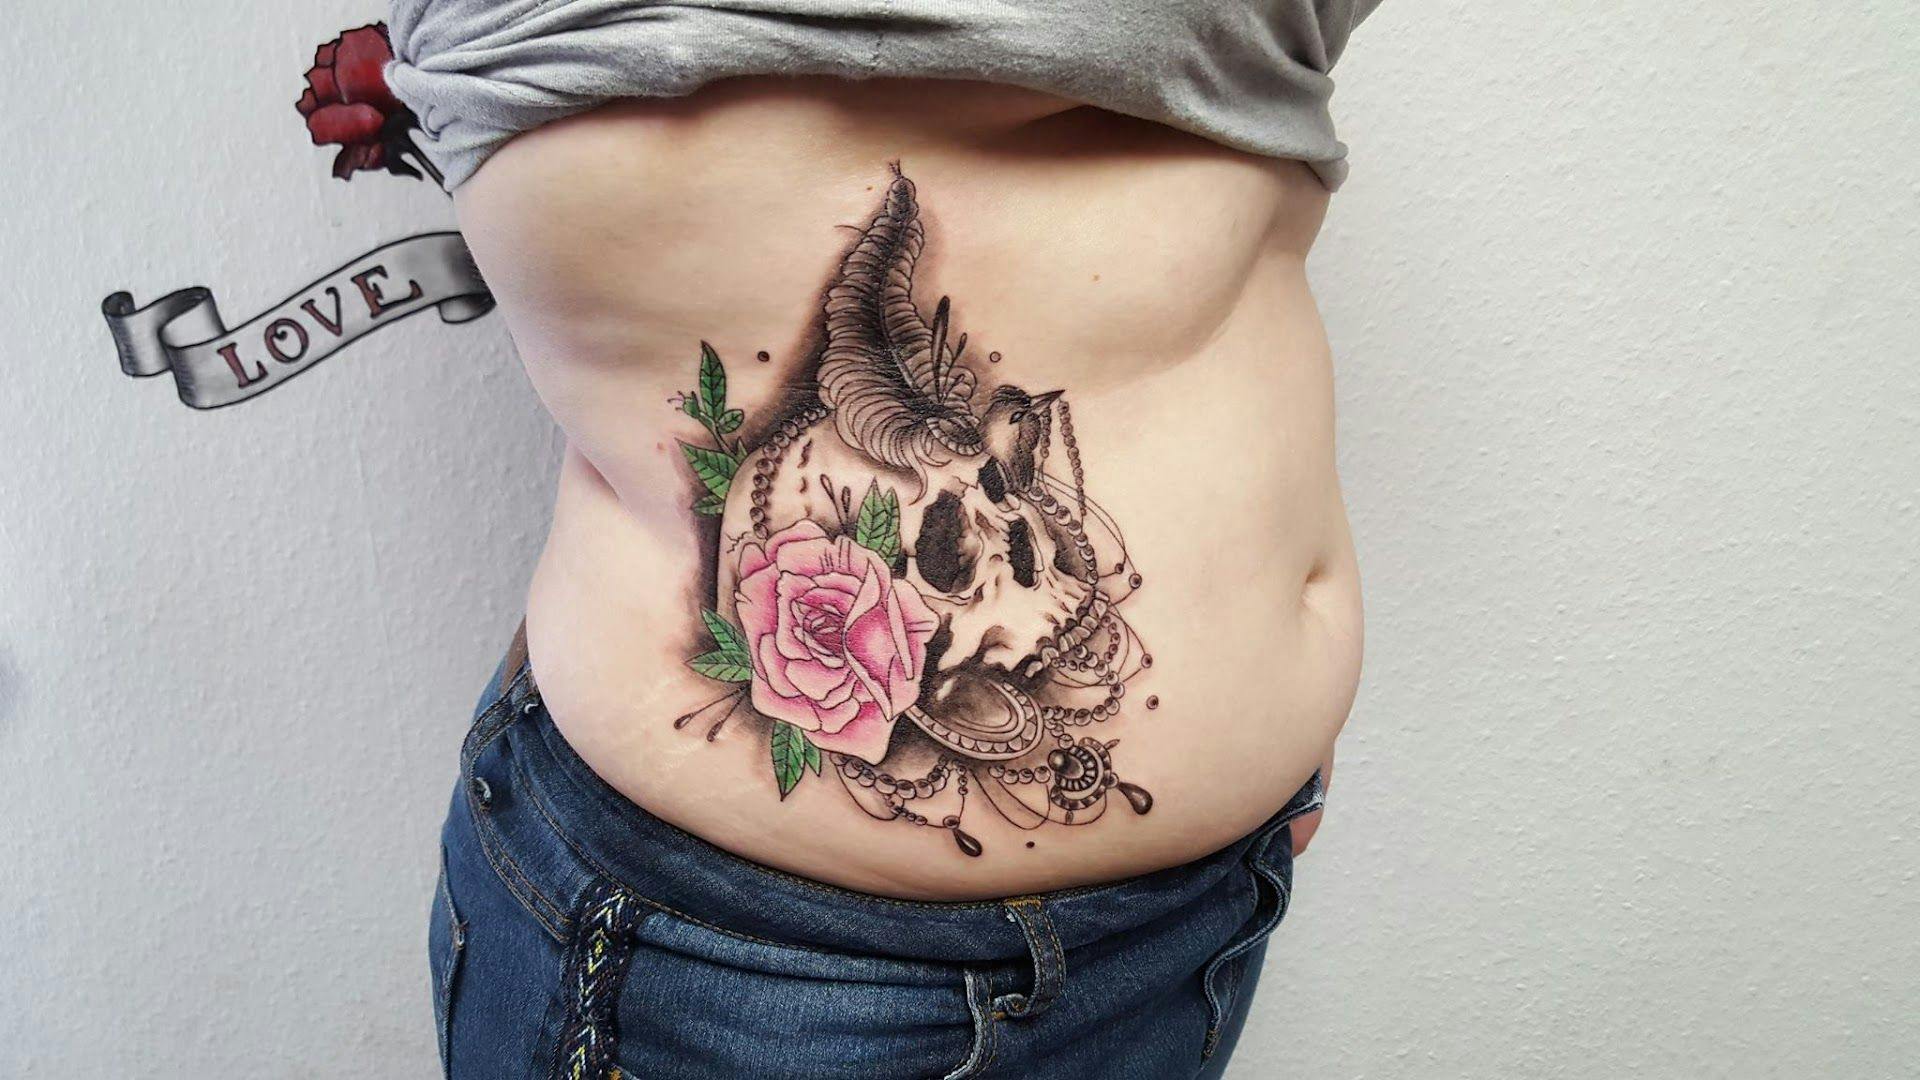 a woman's stomach with a rose and a bird japanische tattoos in leipzig, aschaffenburg, germany